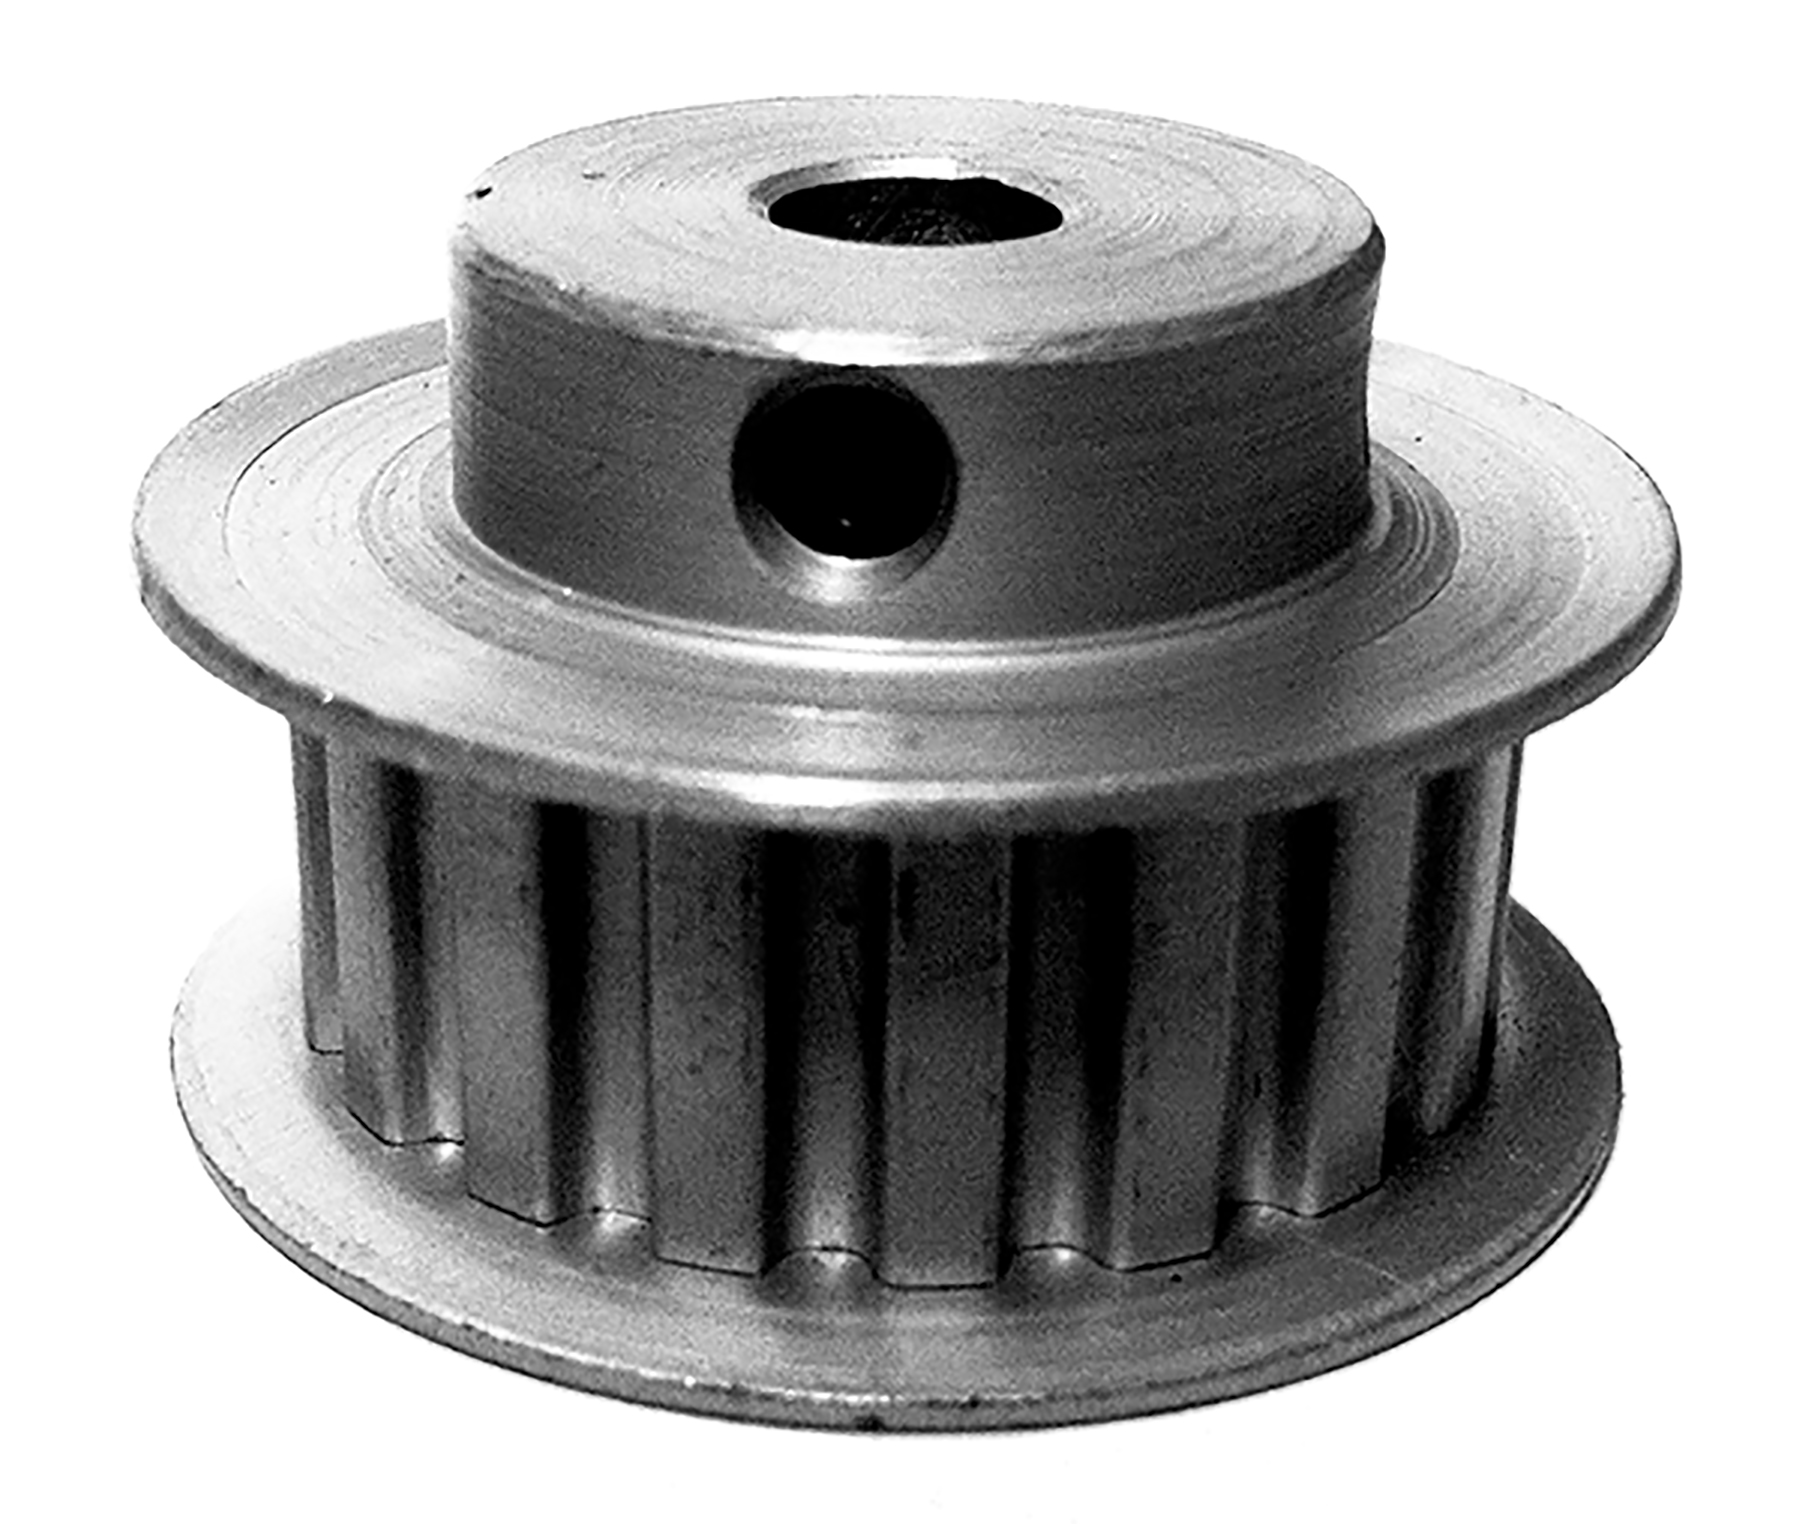 18XL037-6FA3 - Aluminum Imperial Pitch Pulleys